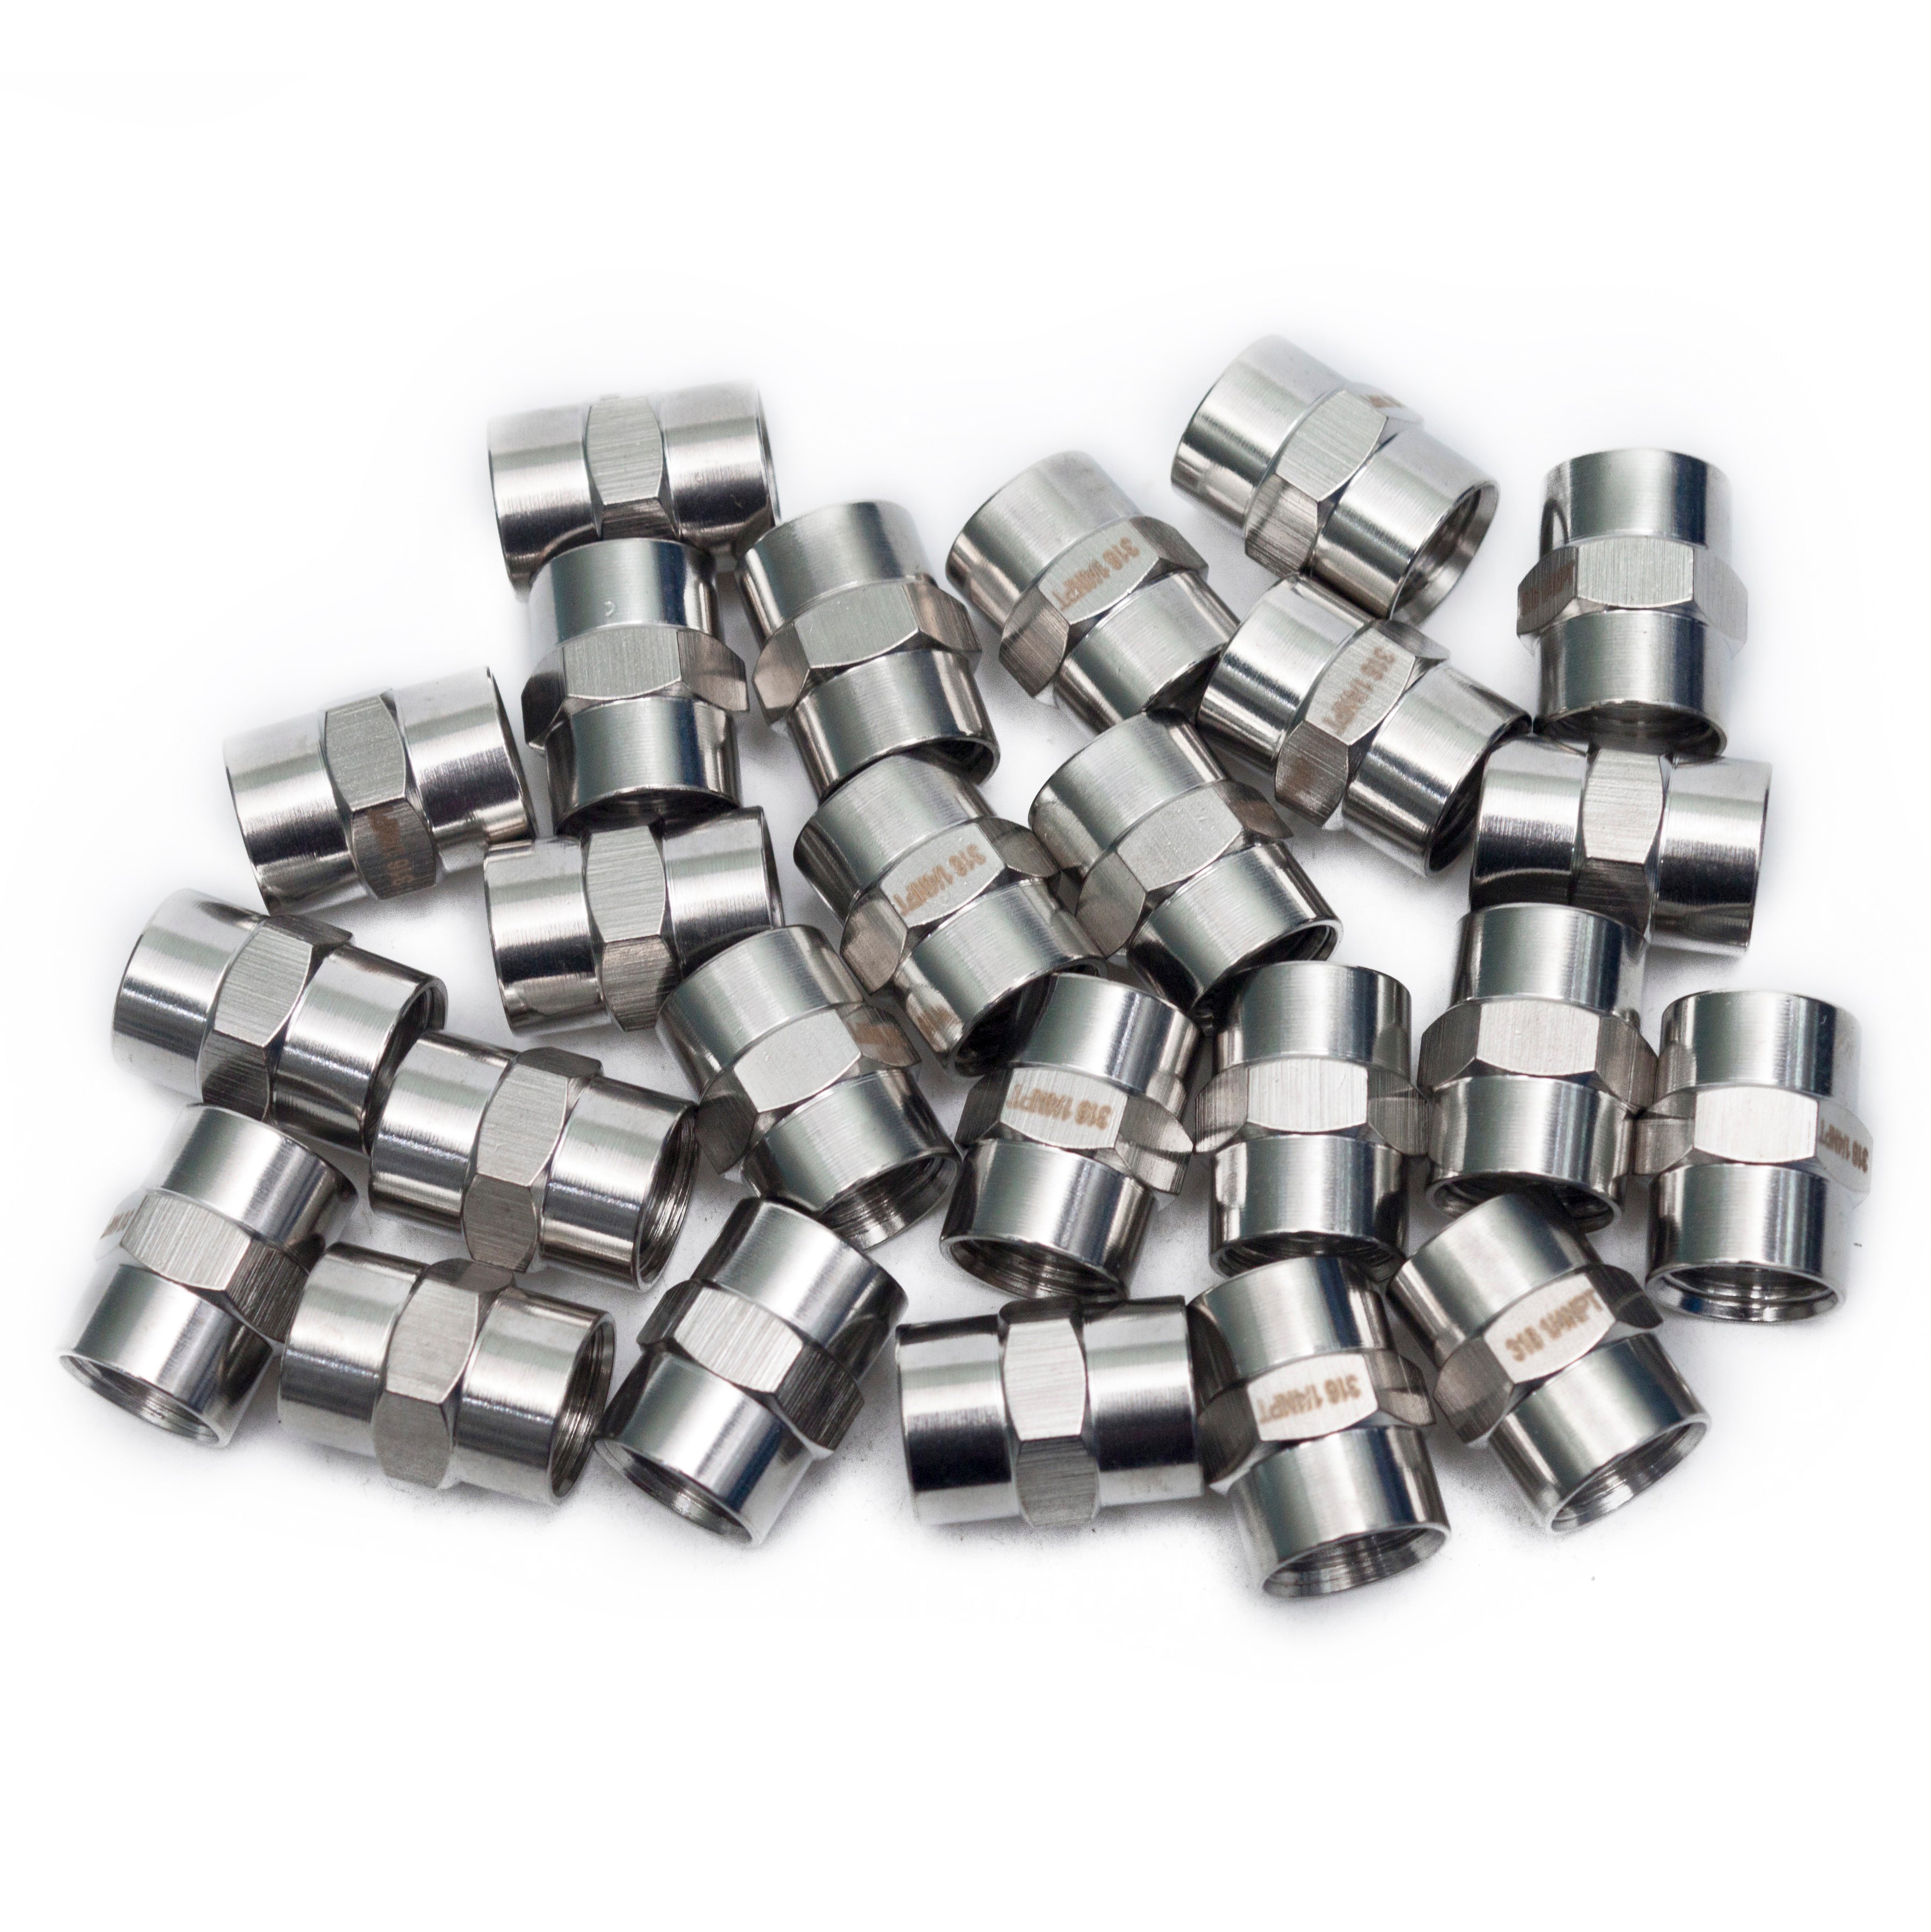 LTWFITTING Bar Production Stainless Steel 316 Pipe Fitting 1/4 Inch Female NPT Coupling Water Boat (Pack of 25)